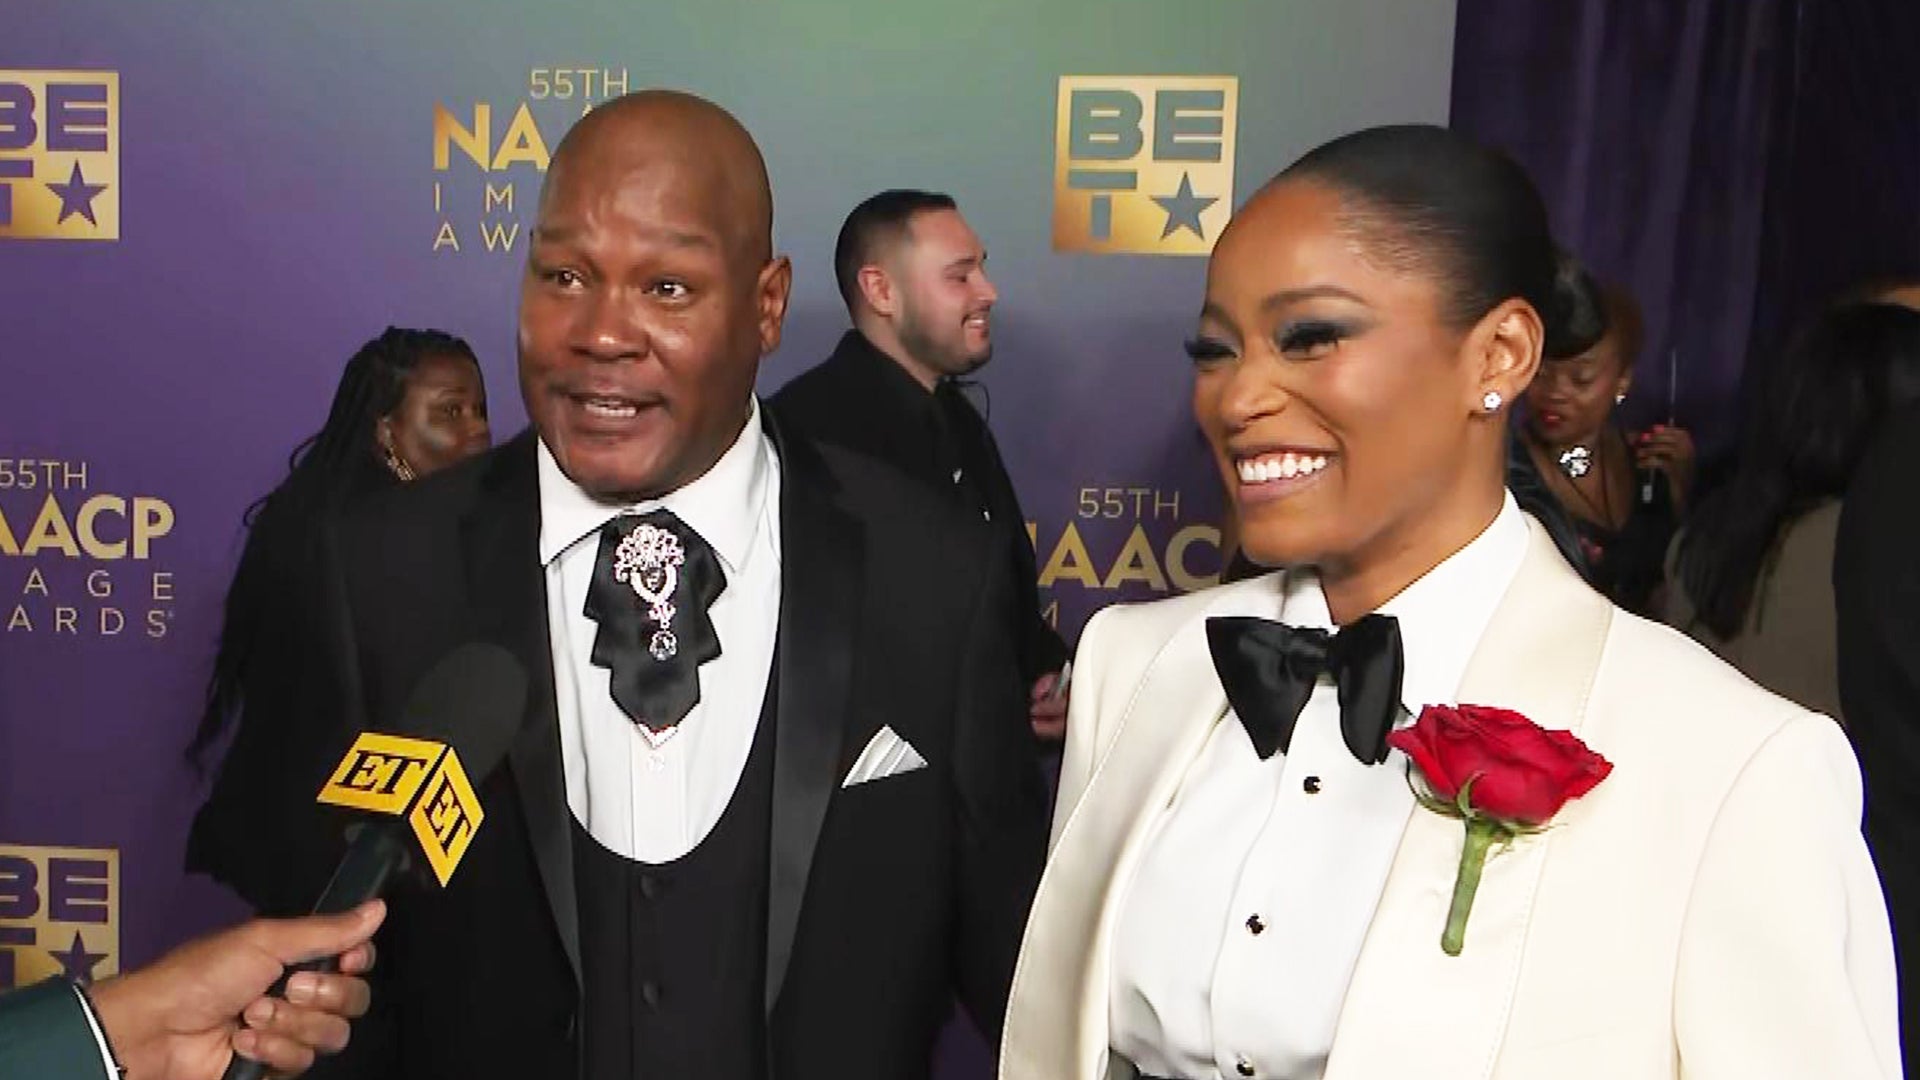 Watch Keke Palmer’s Dad Praise Her Success at the NAACP Image Awards (Exclusive)